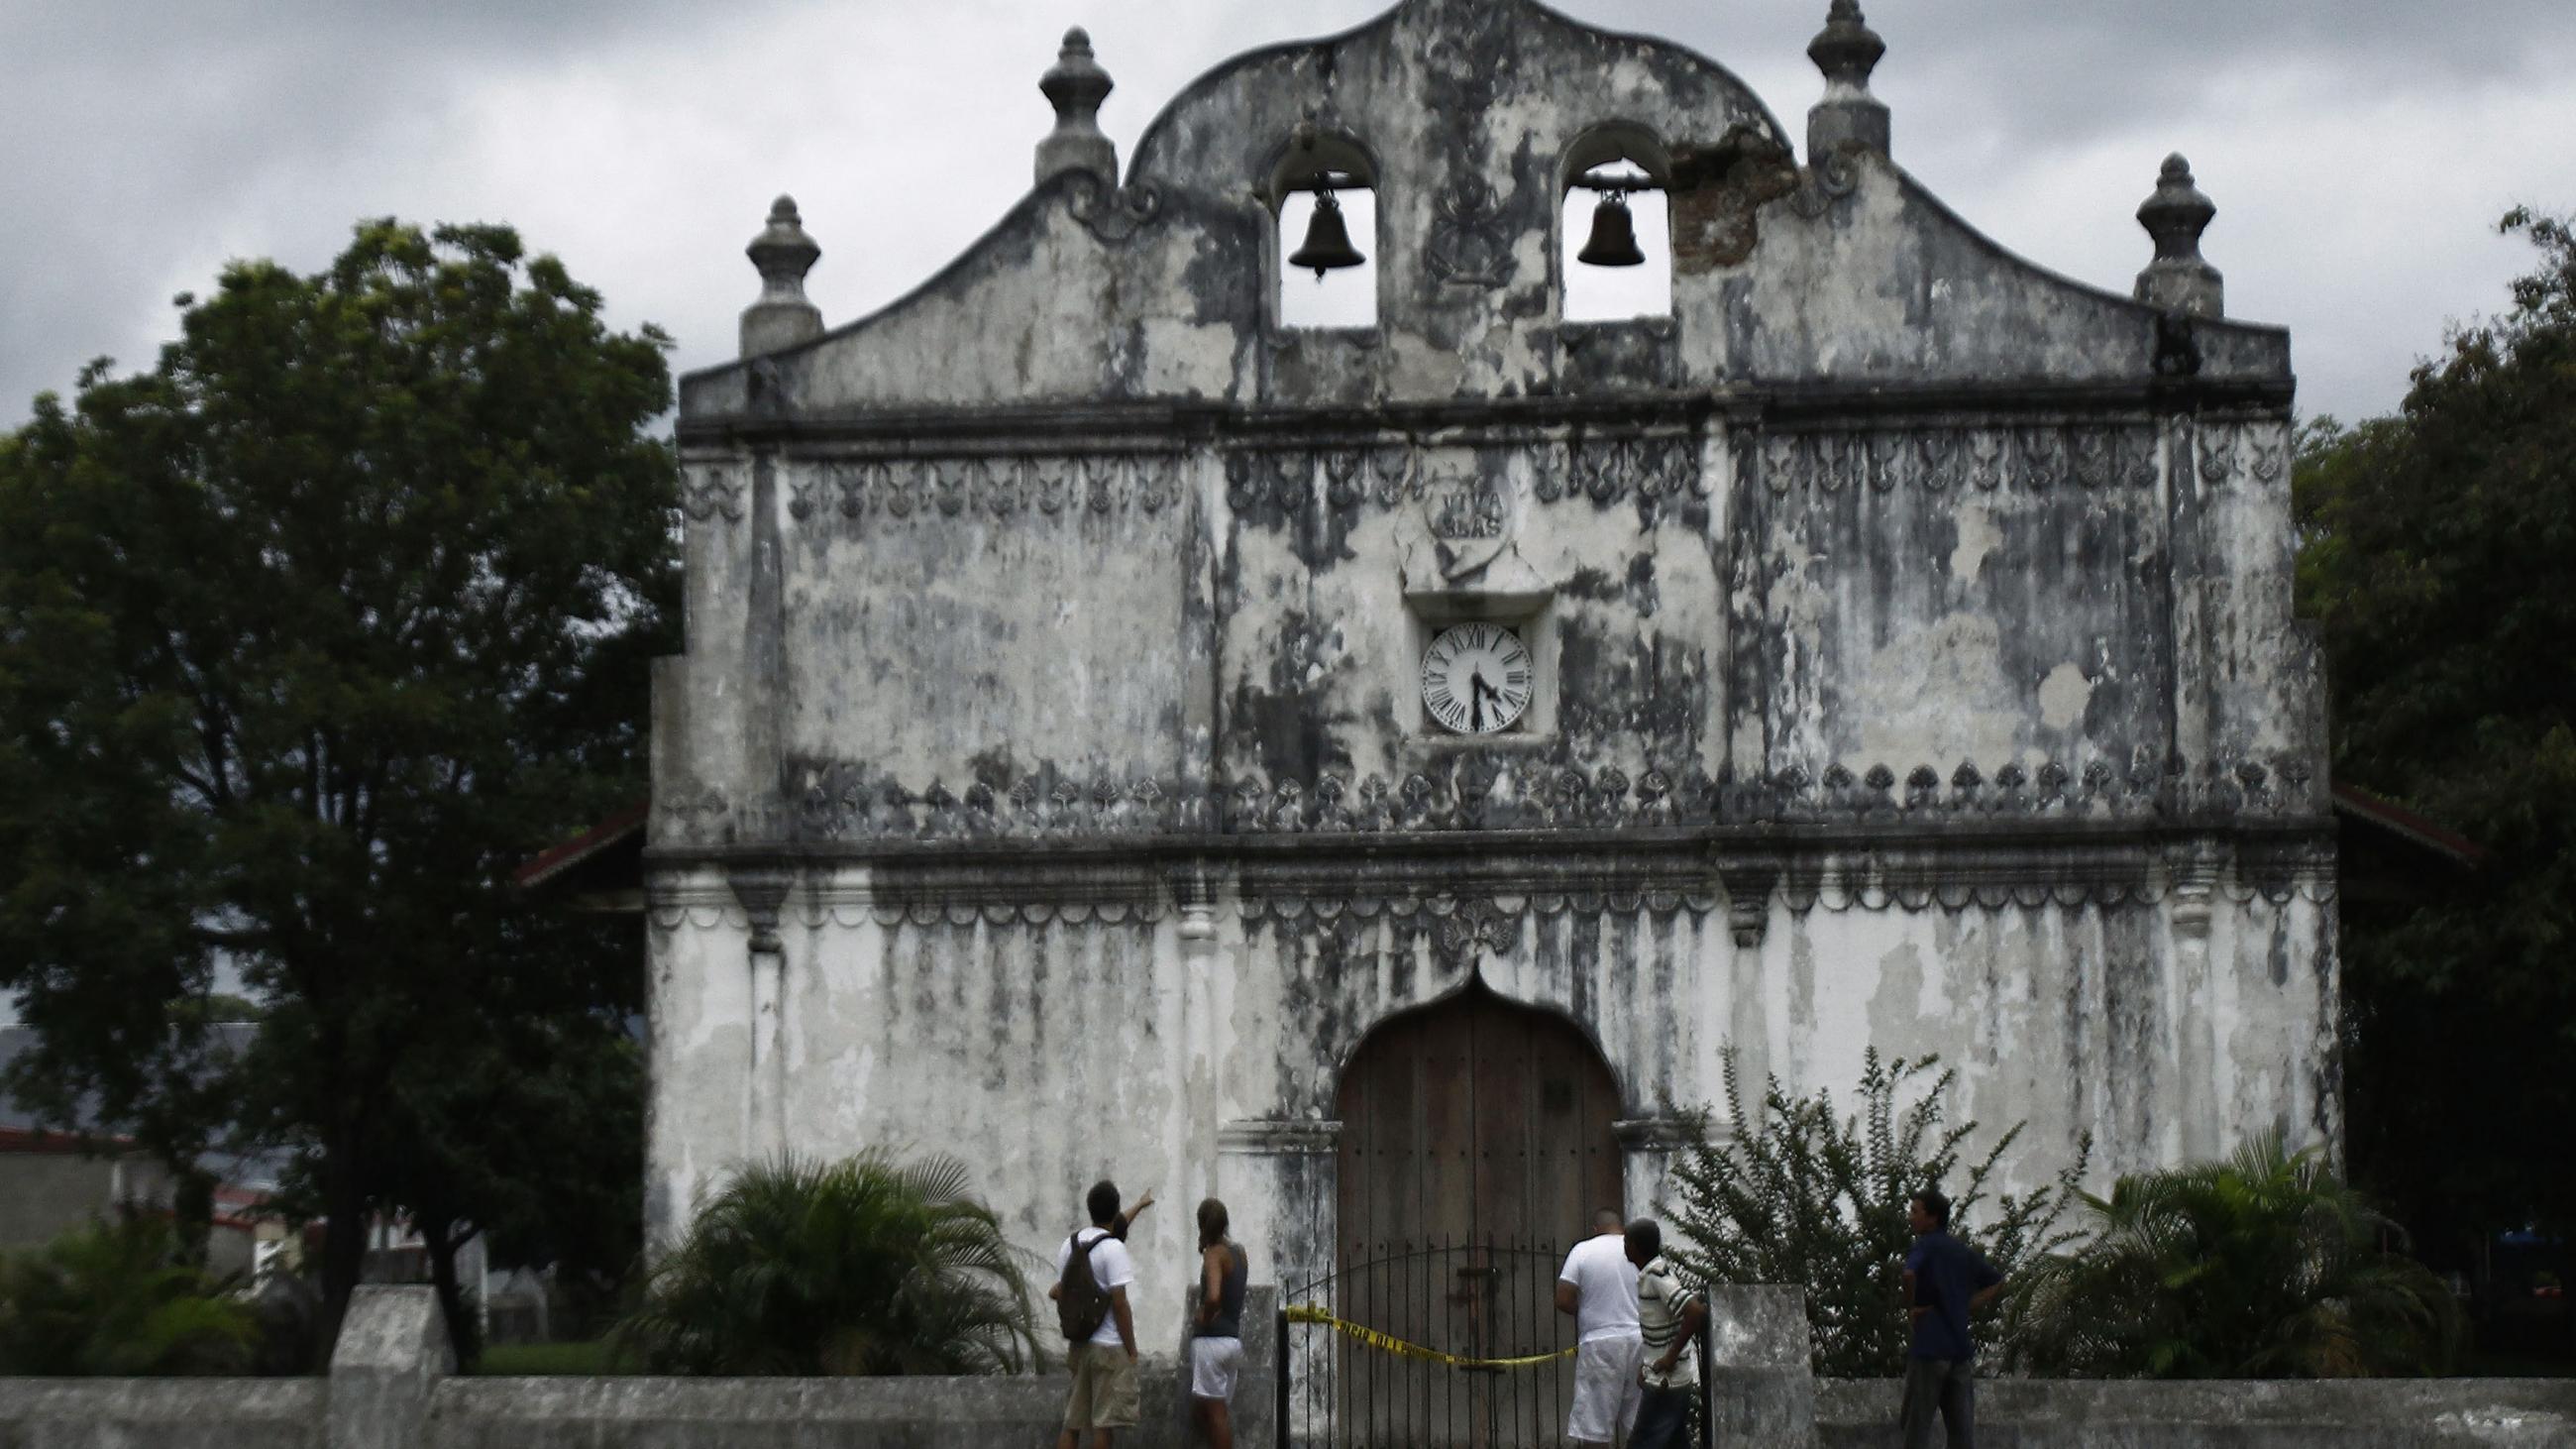 The front facade of a colonial church is pictured against the backdrop of a gray and cloudy sky